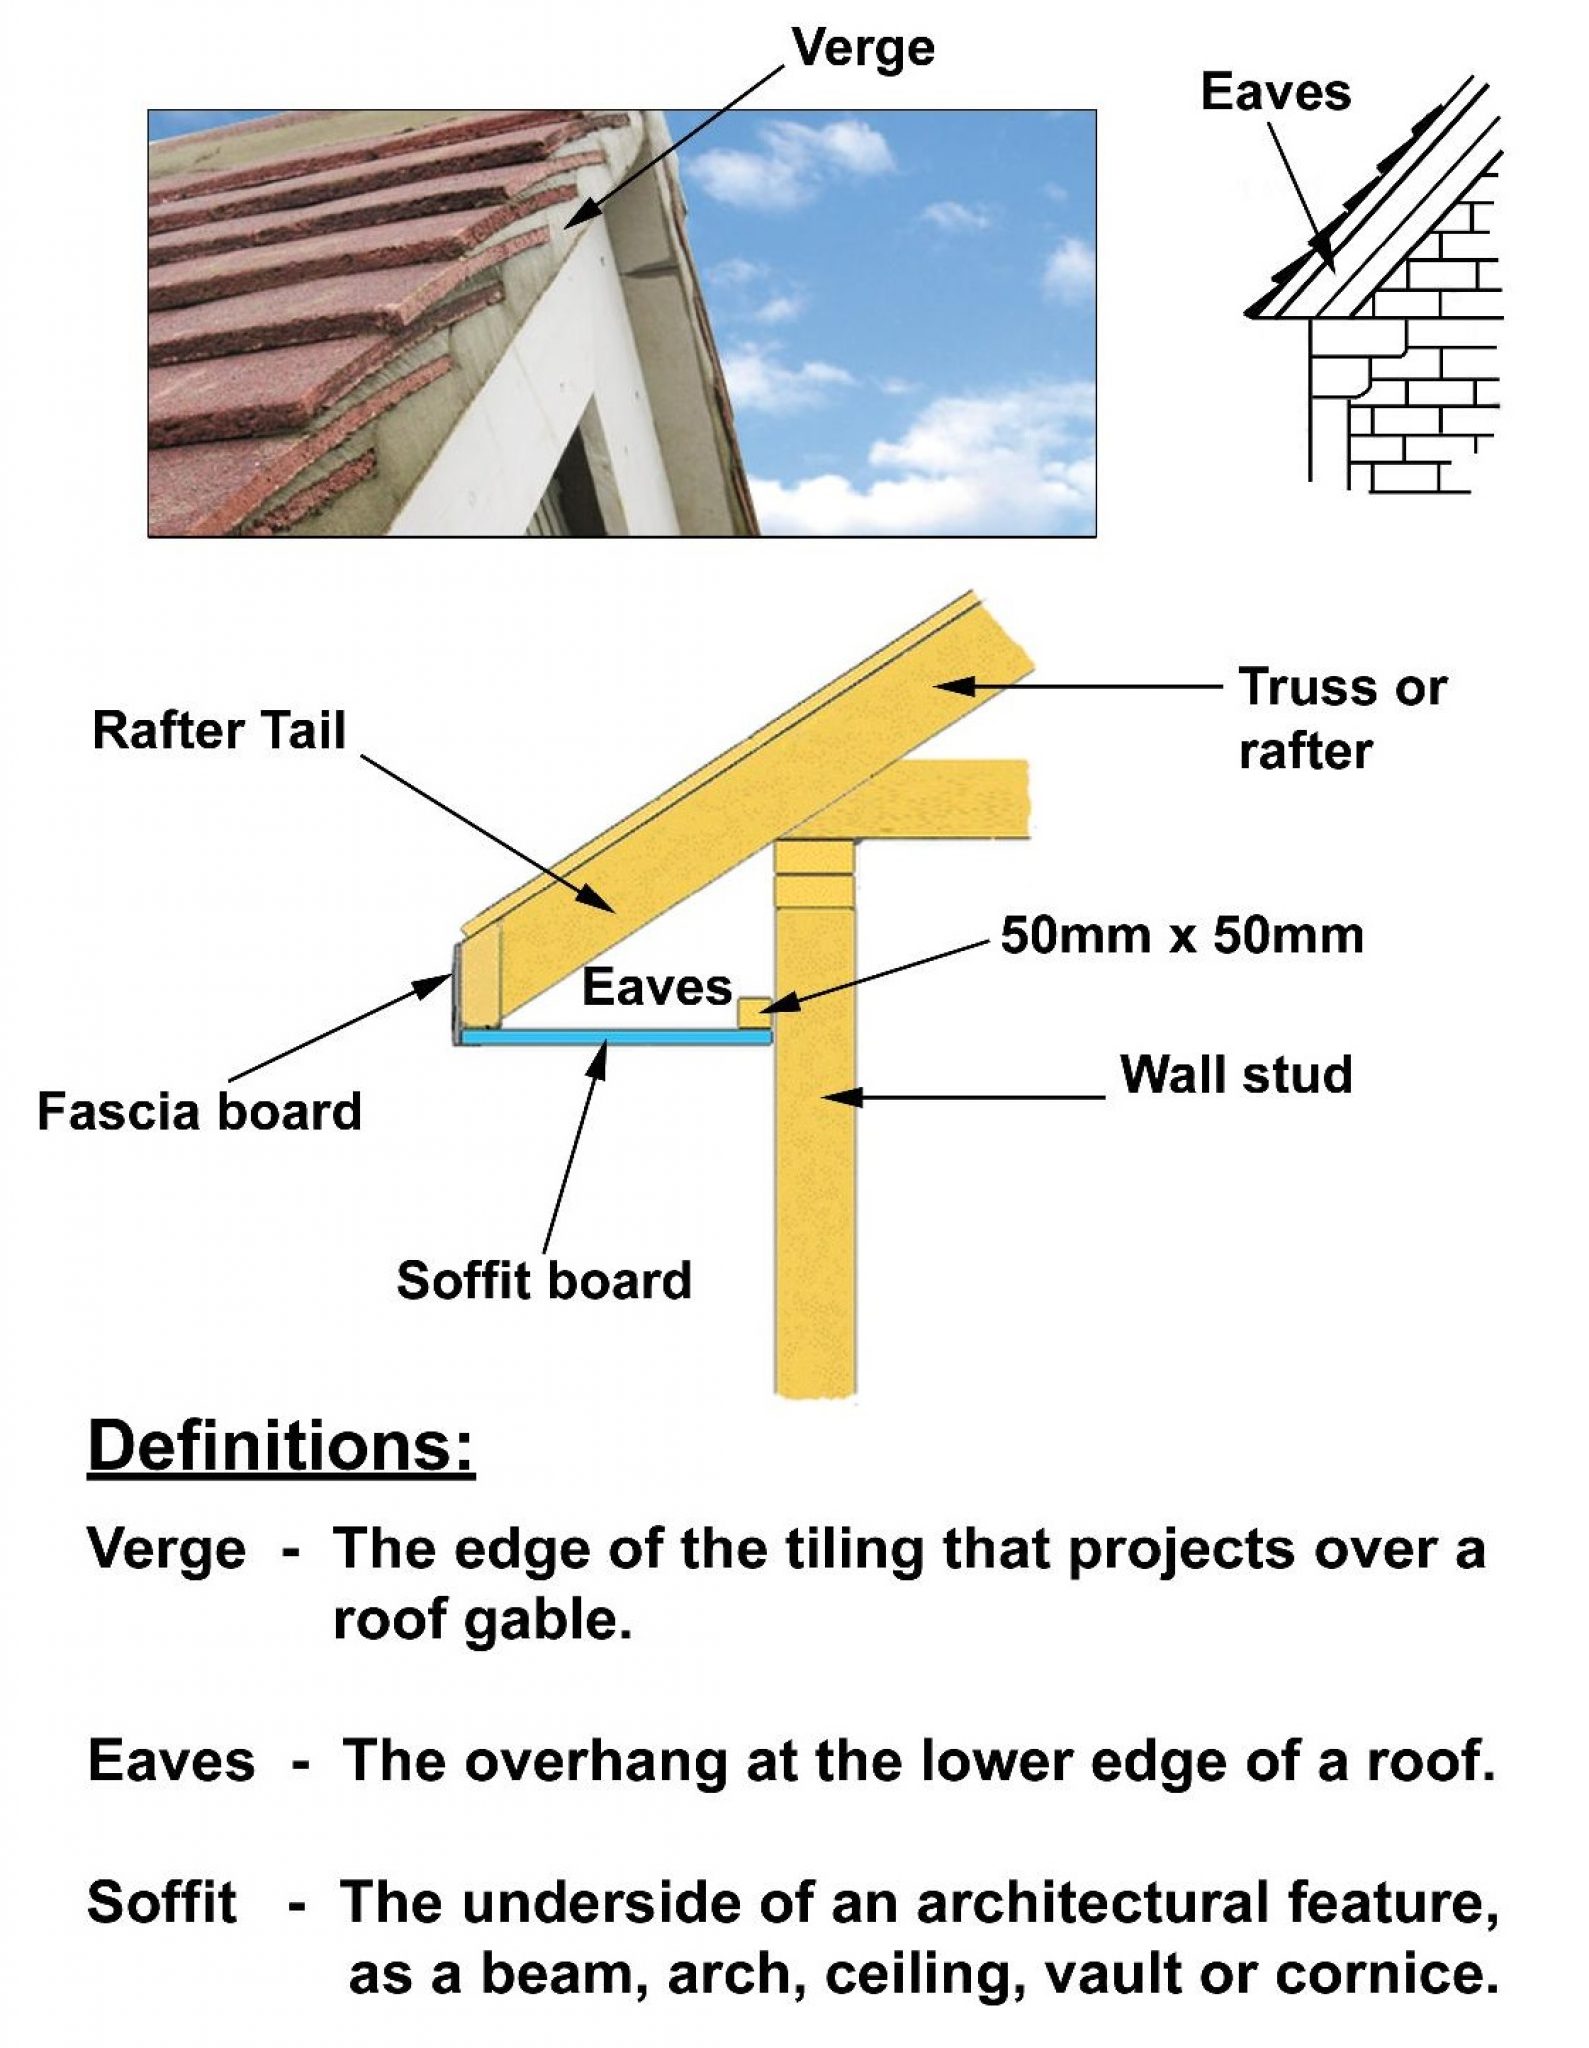 What are roof verges and eaves?